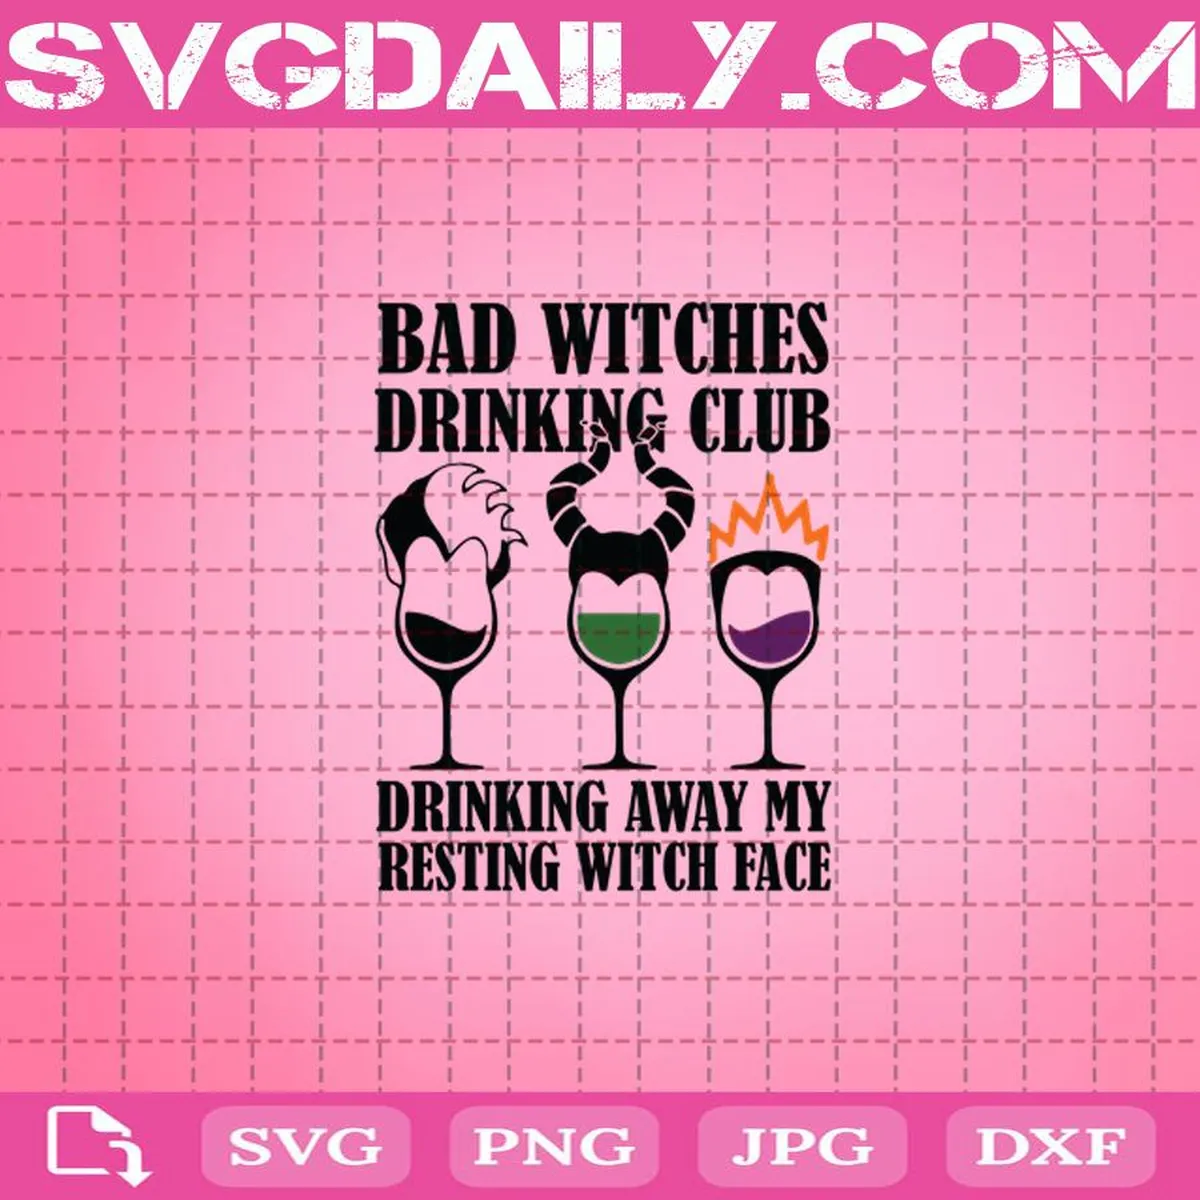 Hocus Pocus Bad Witches Drinking Club Svg, Hocus Pocus Svg, Horror Movies Svg, Witches Drinking Svg, Bad Witches Svg